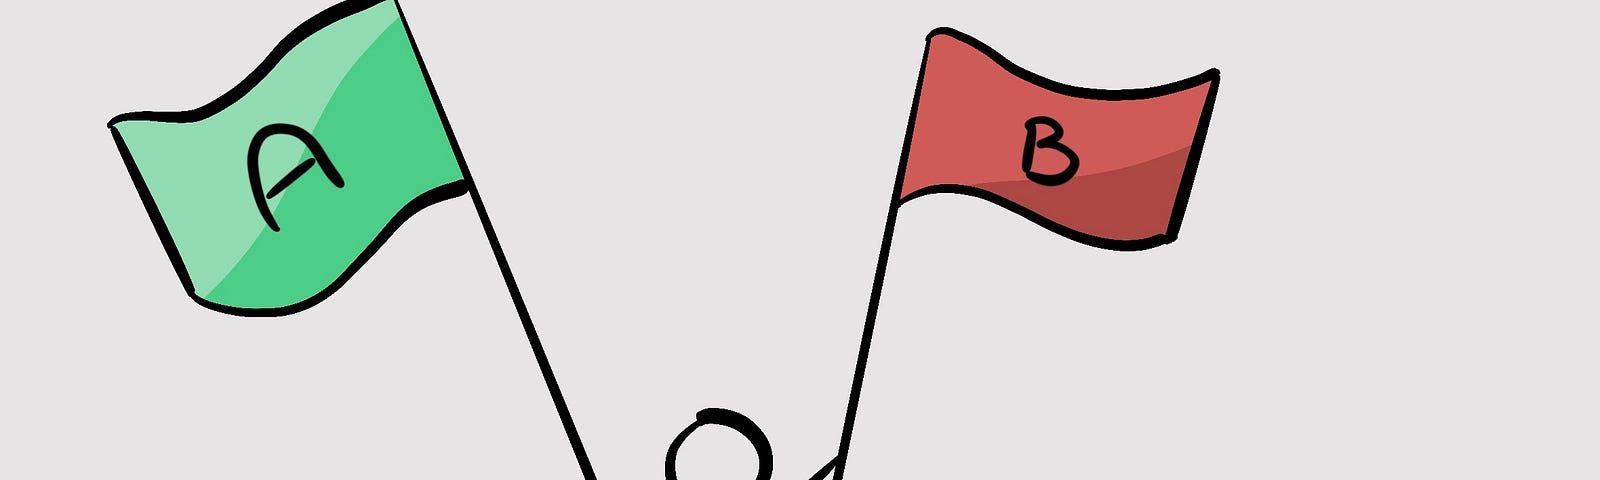 Stick figure holding up a green and red flag with an A and a B written on them